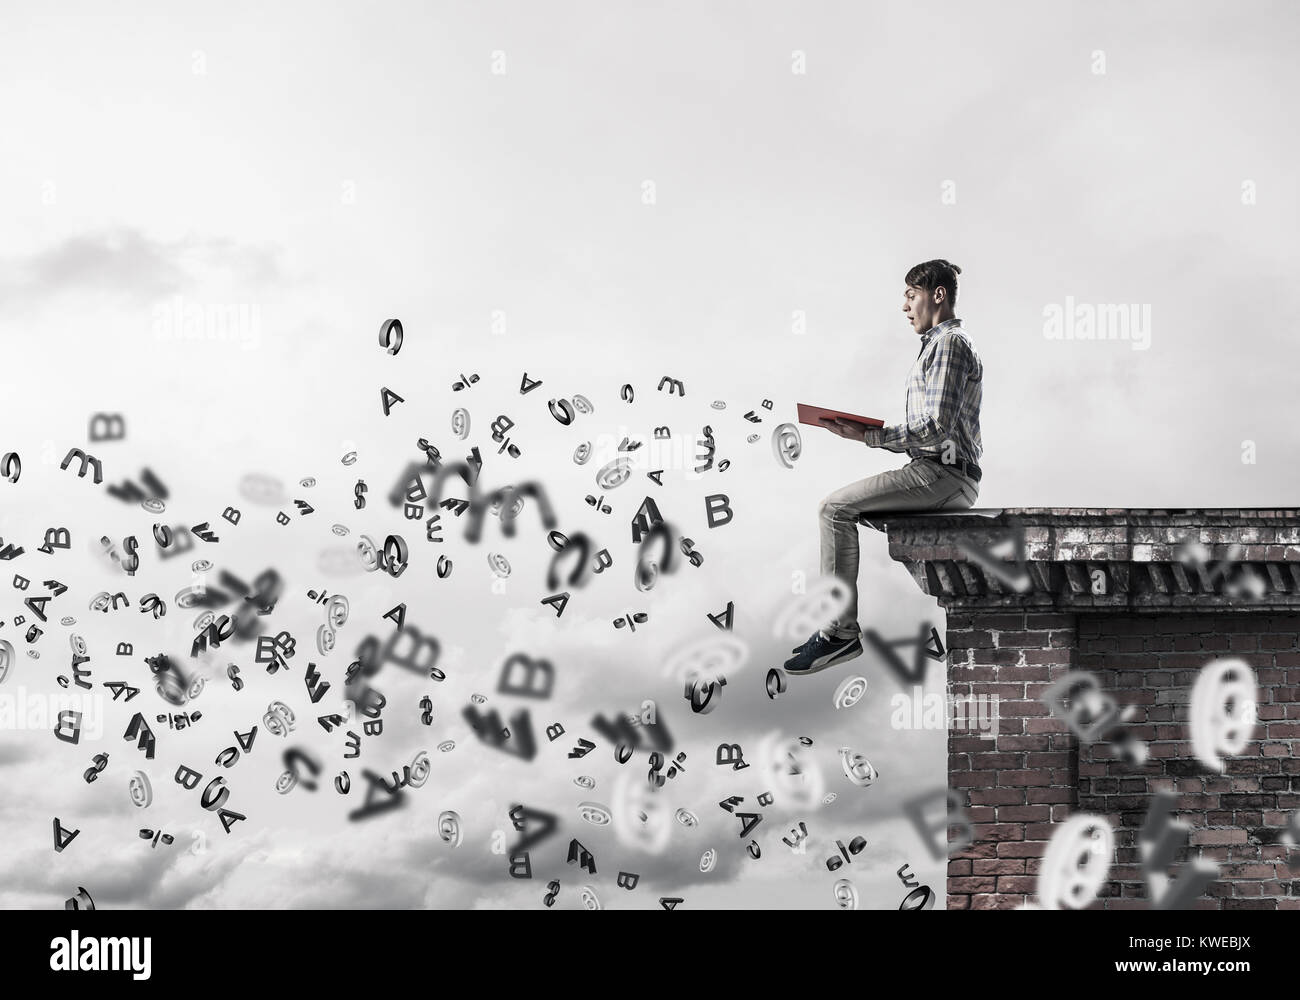 Man on roof edge reading book and symbols flying around Stock Photo